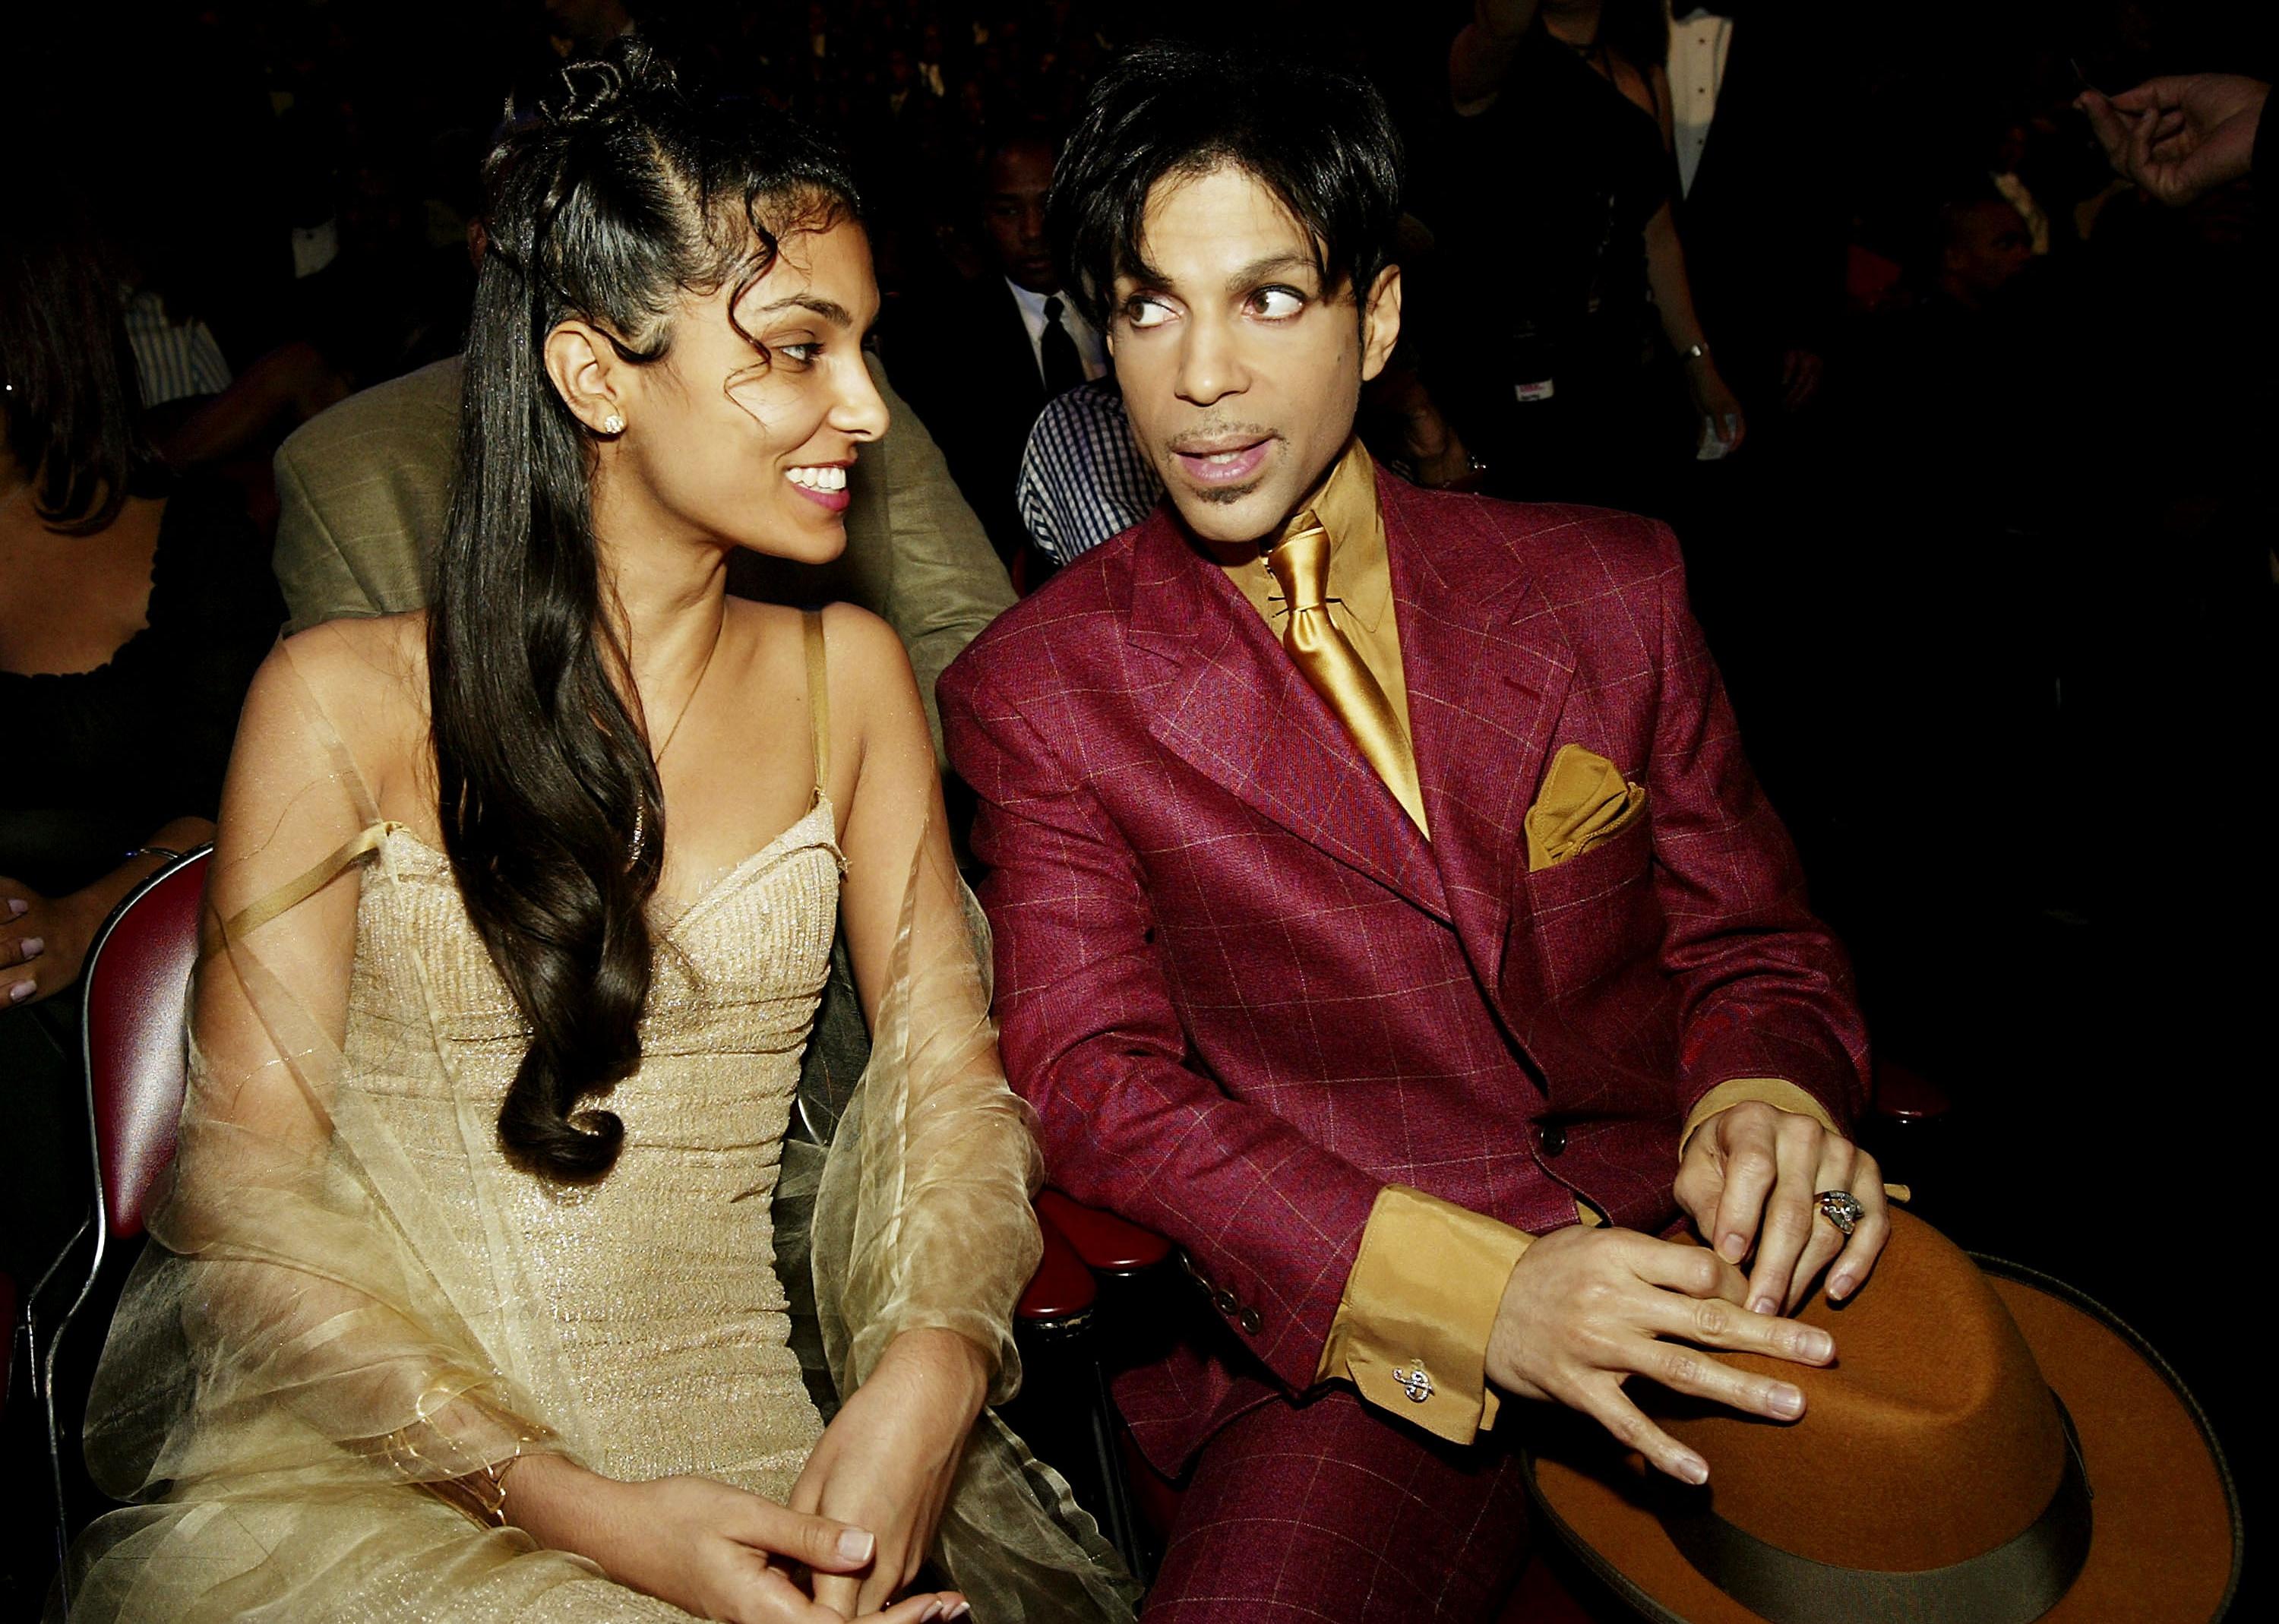 Prince and Manuela Testolini sit in the audience at the 35th Annual NAACP Image Awards.